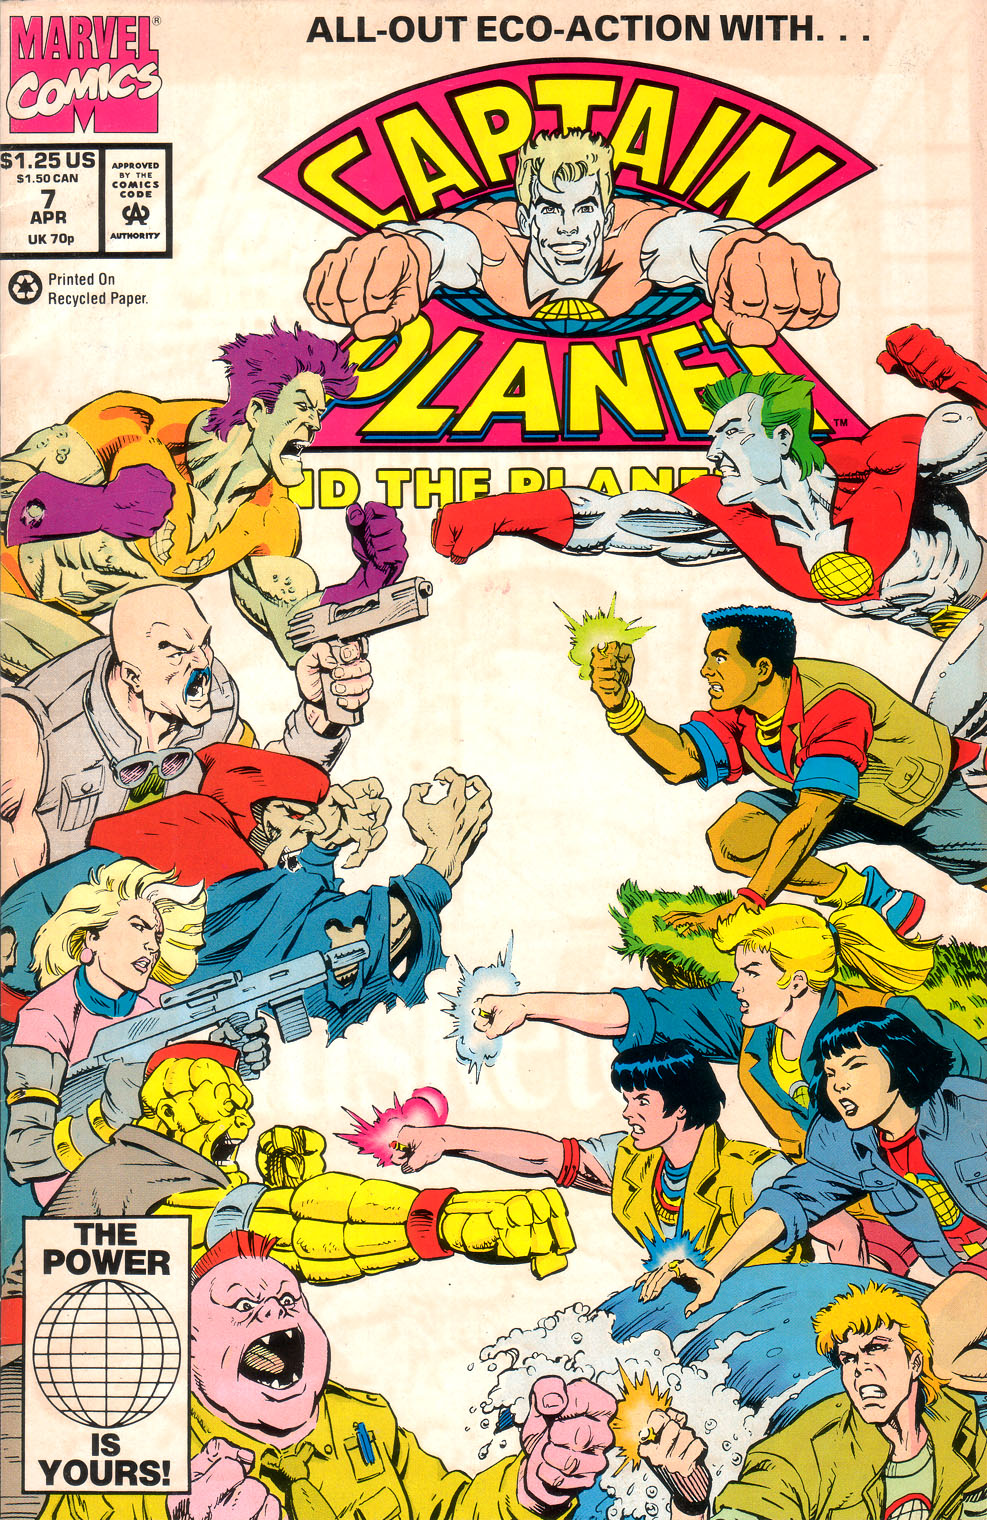 Captain Planet And The Planeteers Issue 7 | Read Captain Planet And The  Planeteers Issue 7 comic online in high quality. Read Full Comic online for  free - Read comics online in high quality .